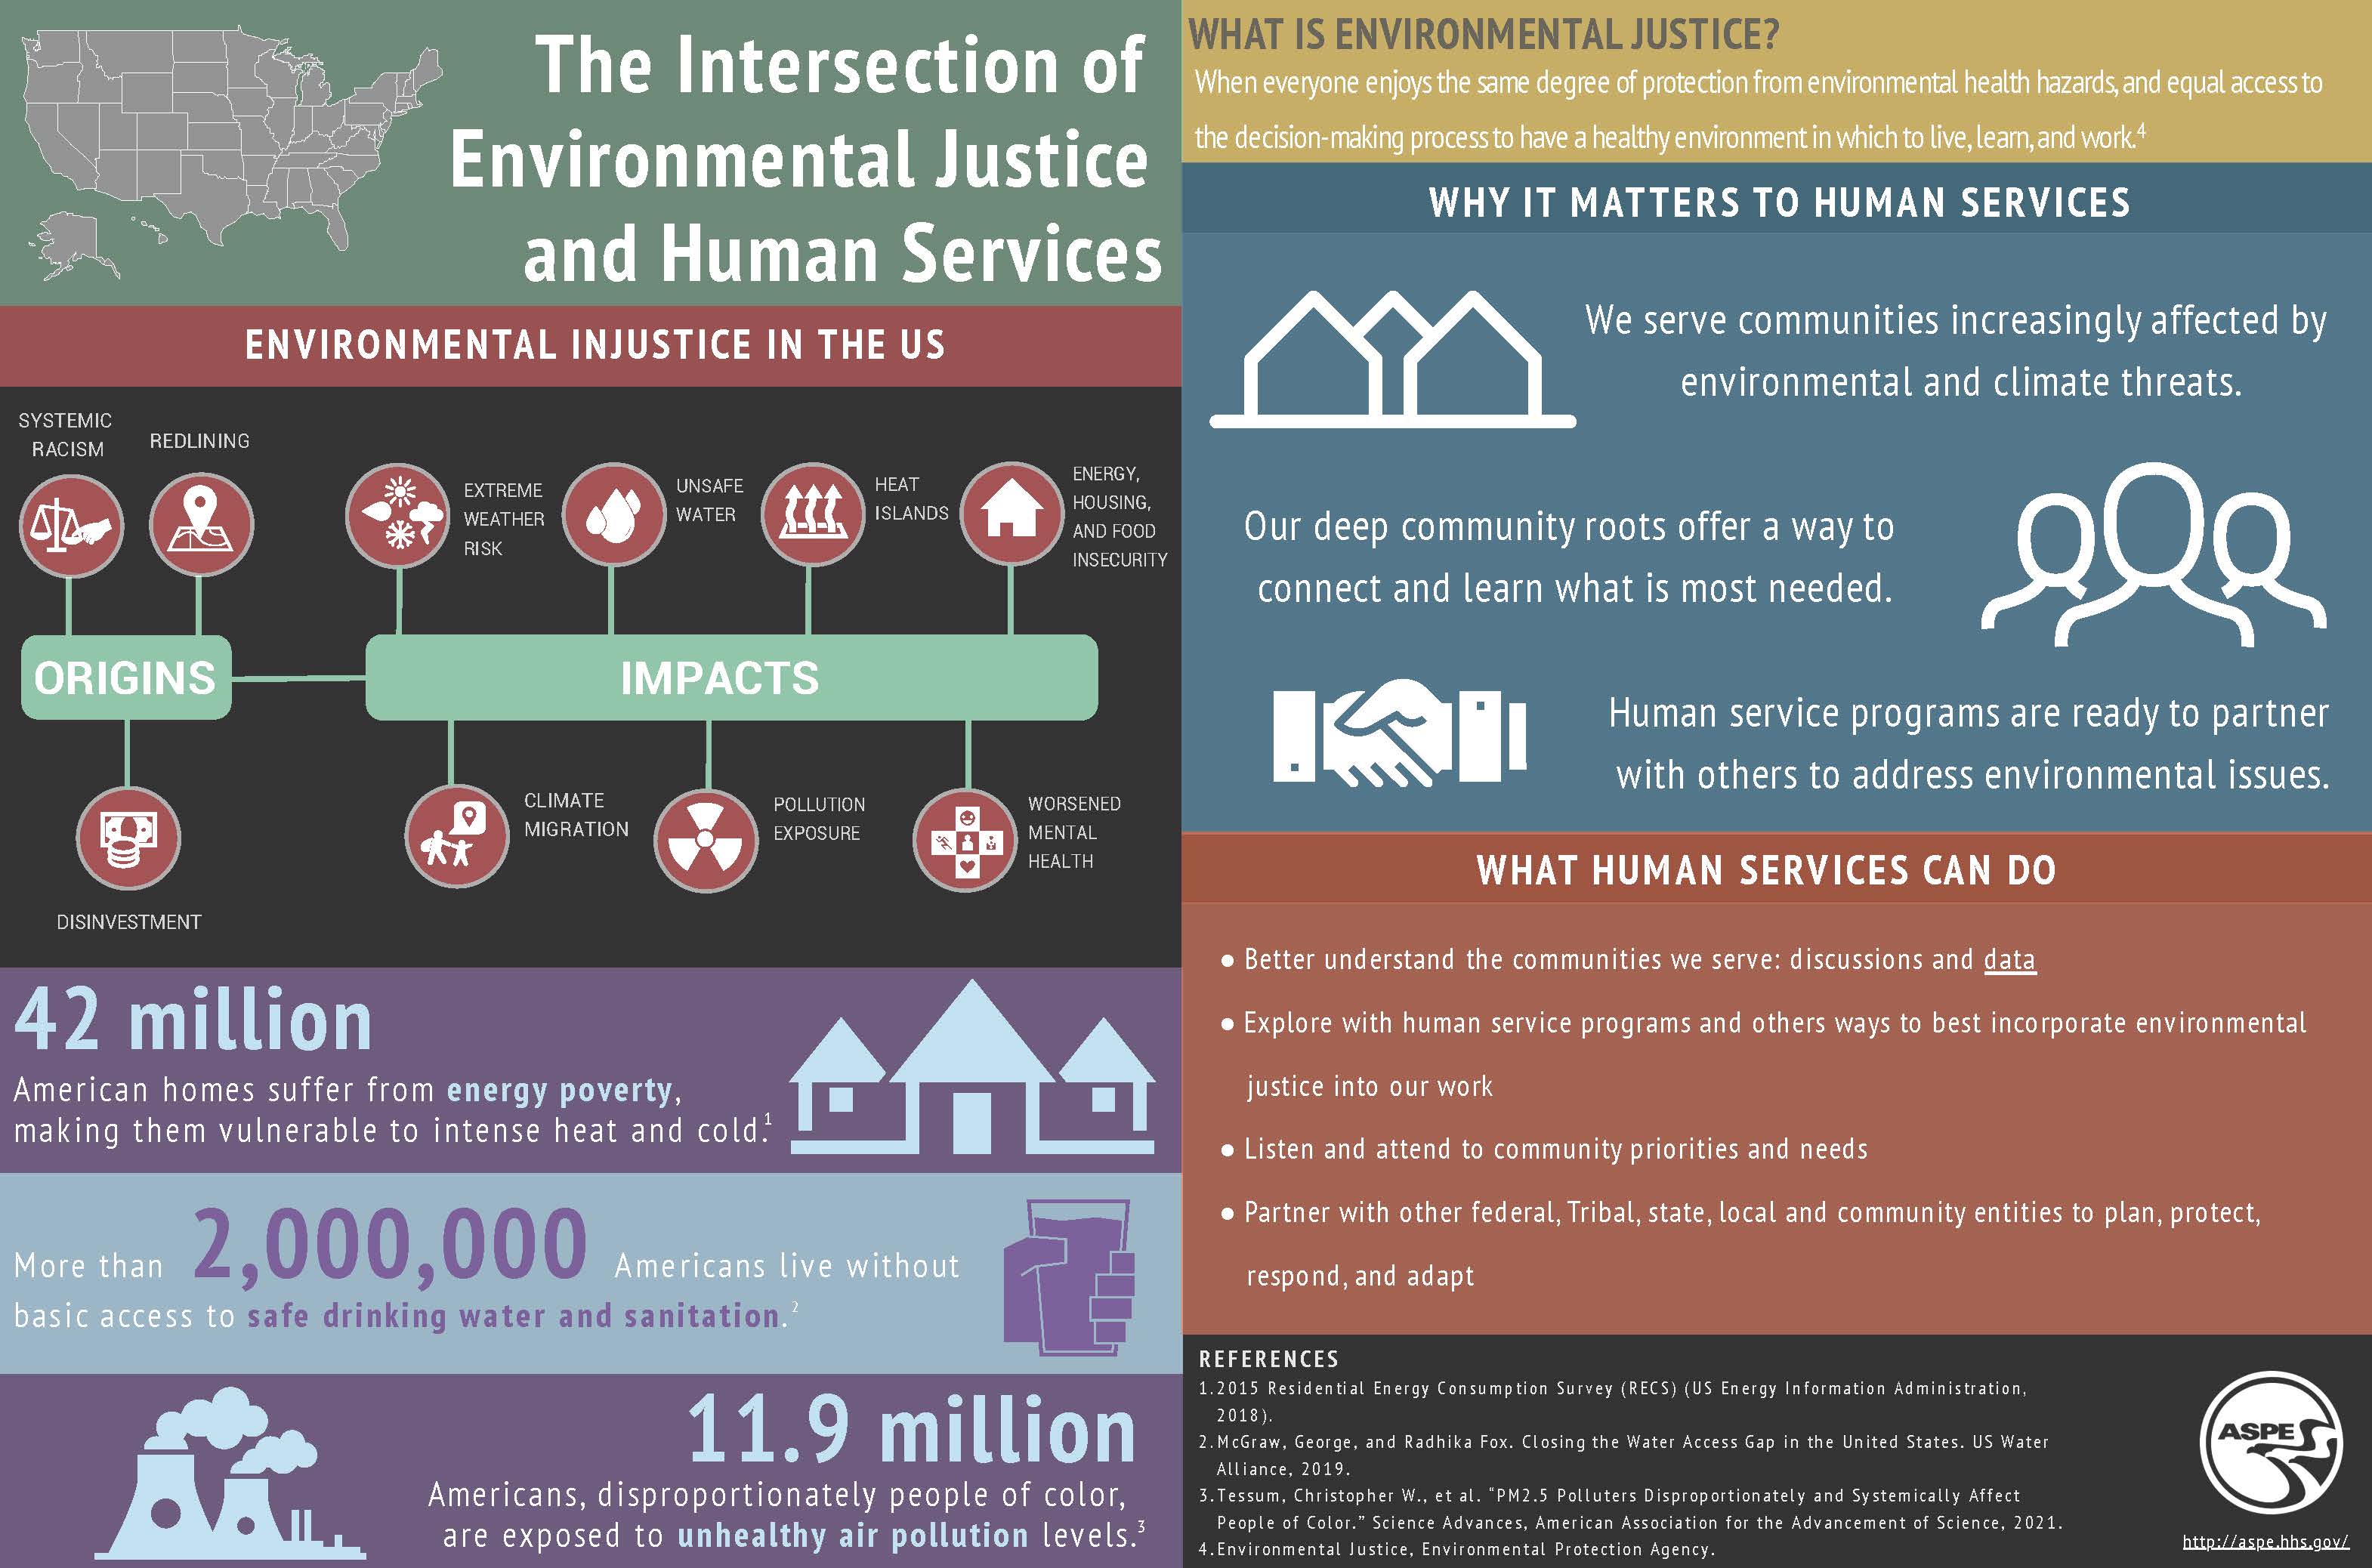 This infographic illustrates the intersection of environmental justice with human services policies and programs. It presents key facts about how participants in human services programs are particularly affected by environmental injustice, and the ways in which these programs can help mitigate the effects of environmental issues, including climate change.